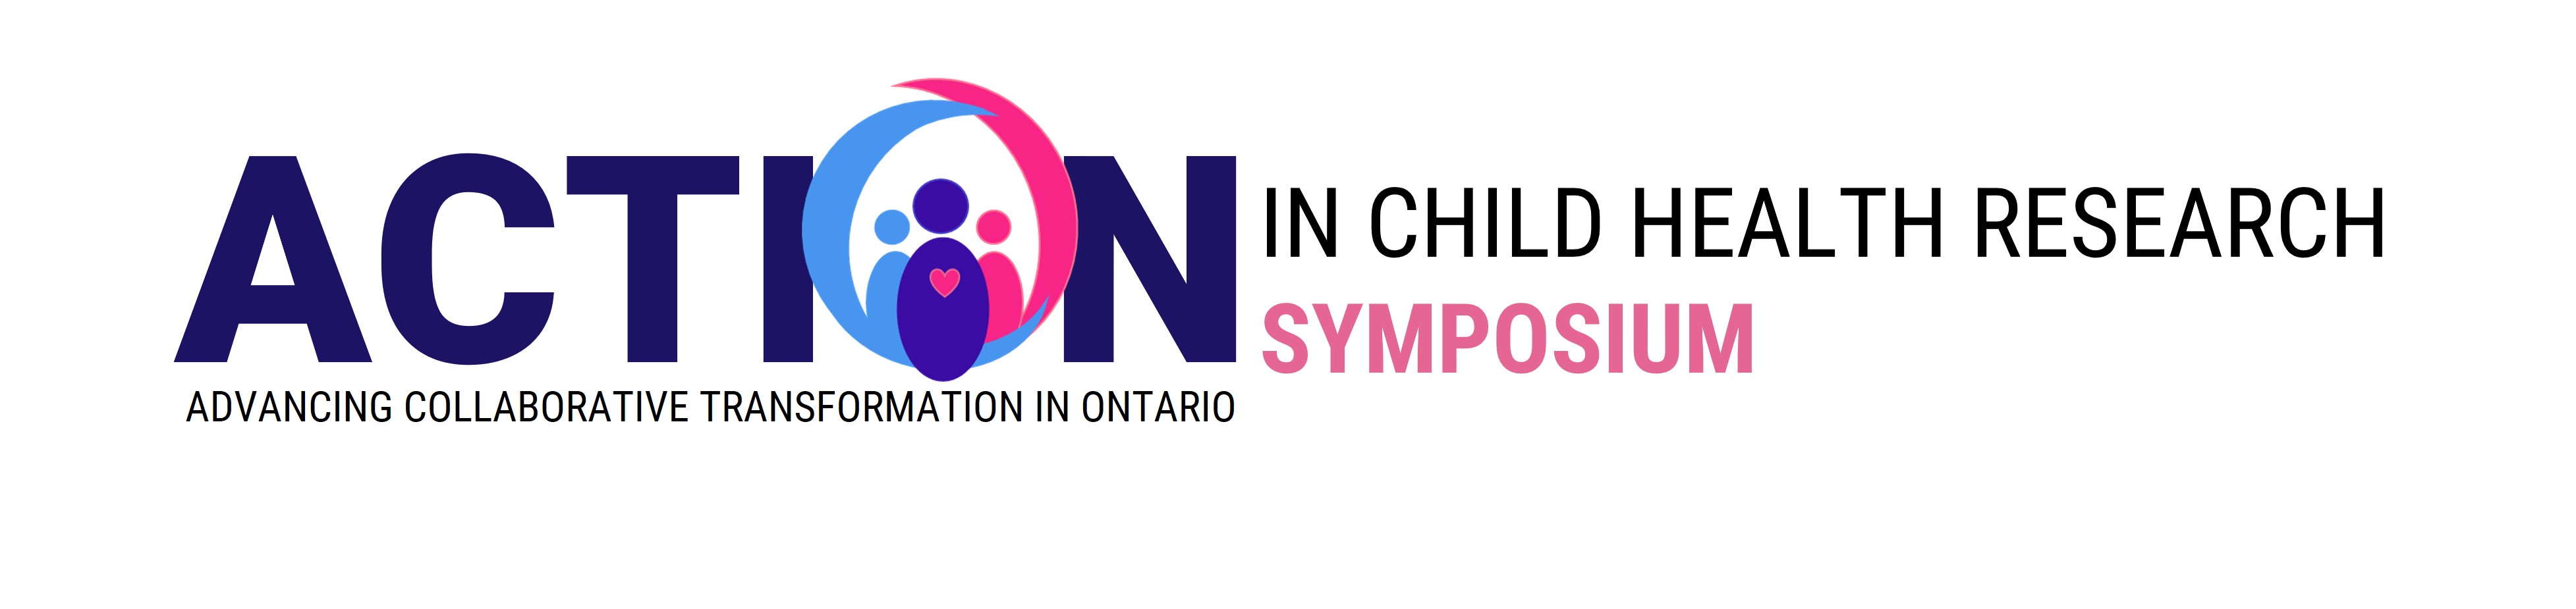 ADVANCING COLLABORATIVE
TRANSFORMATION IN ONTARIO (ACTION) in Child Health Research Symposium